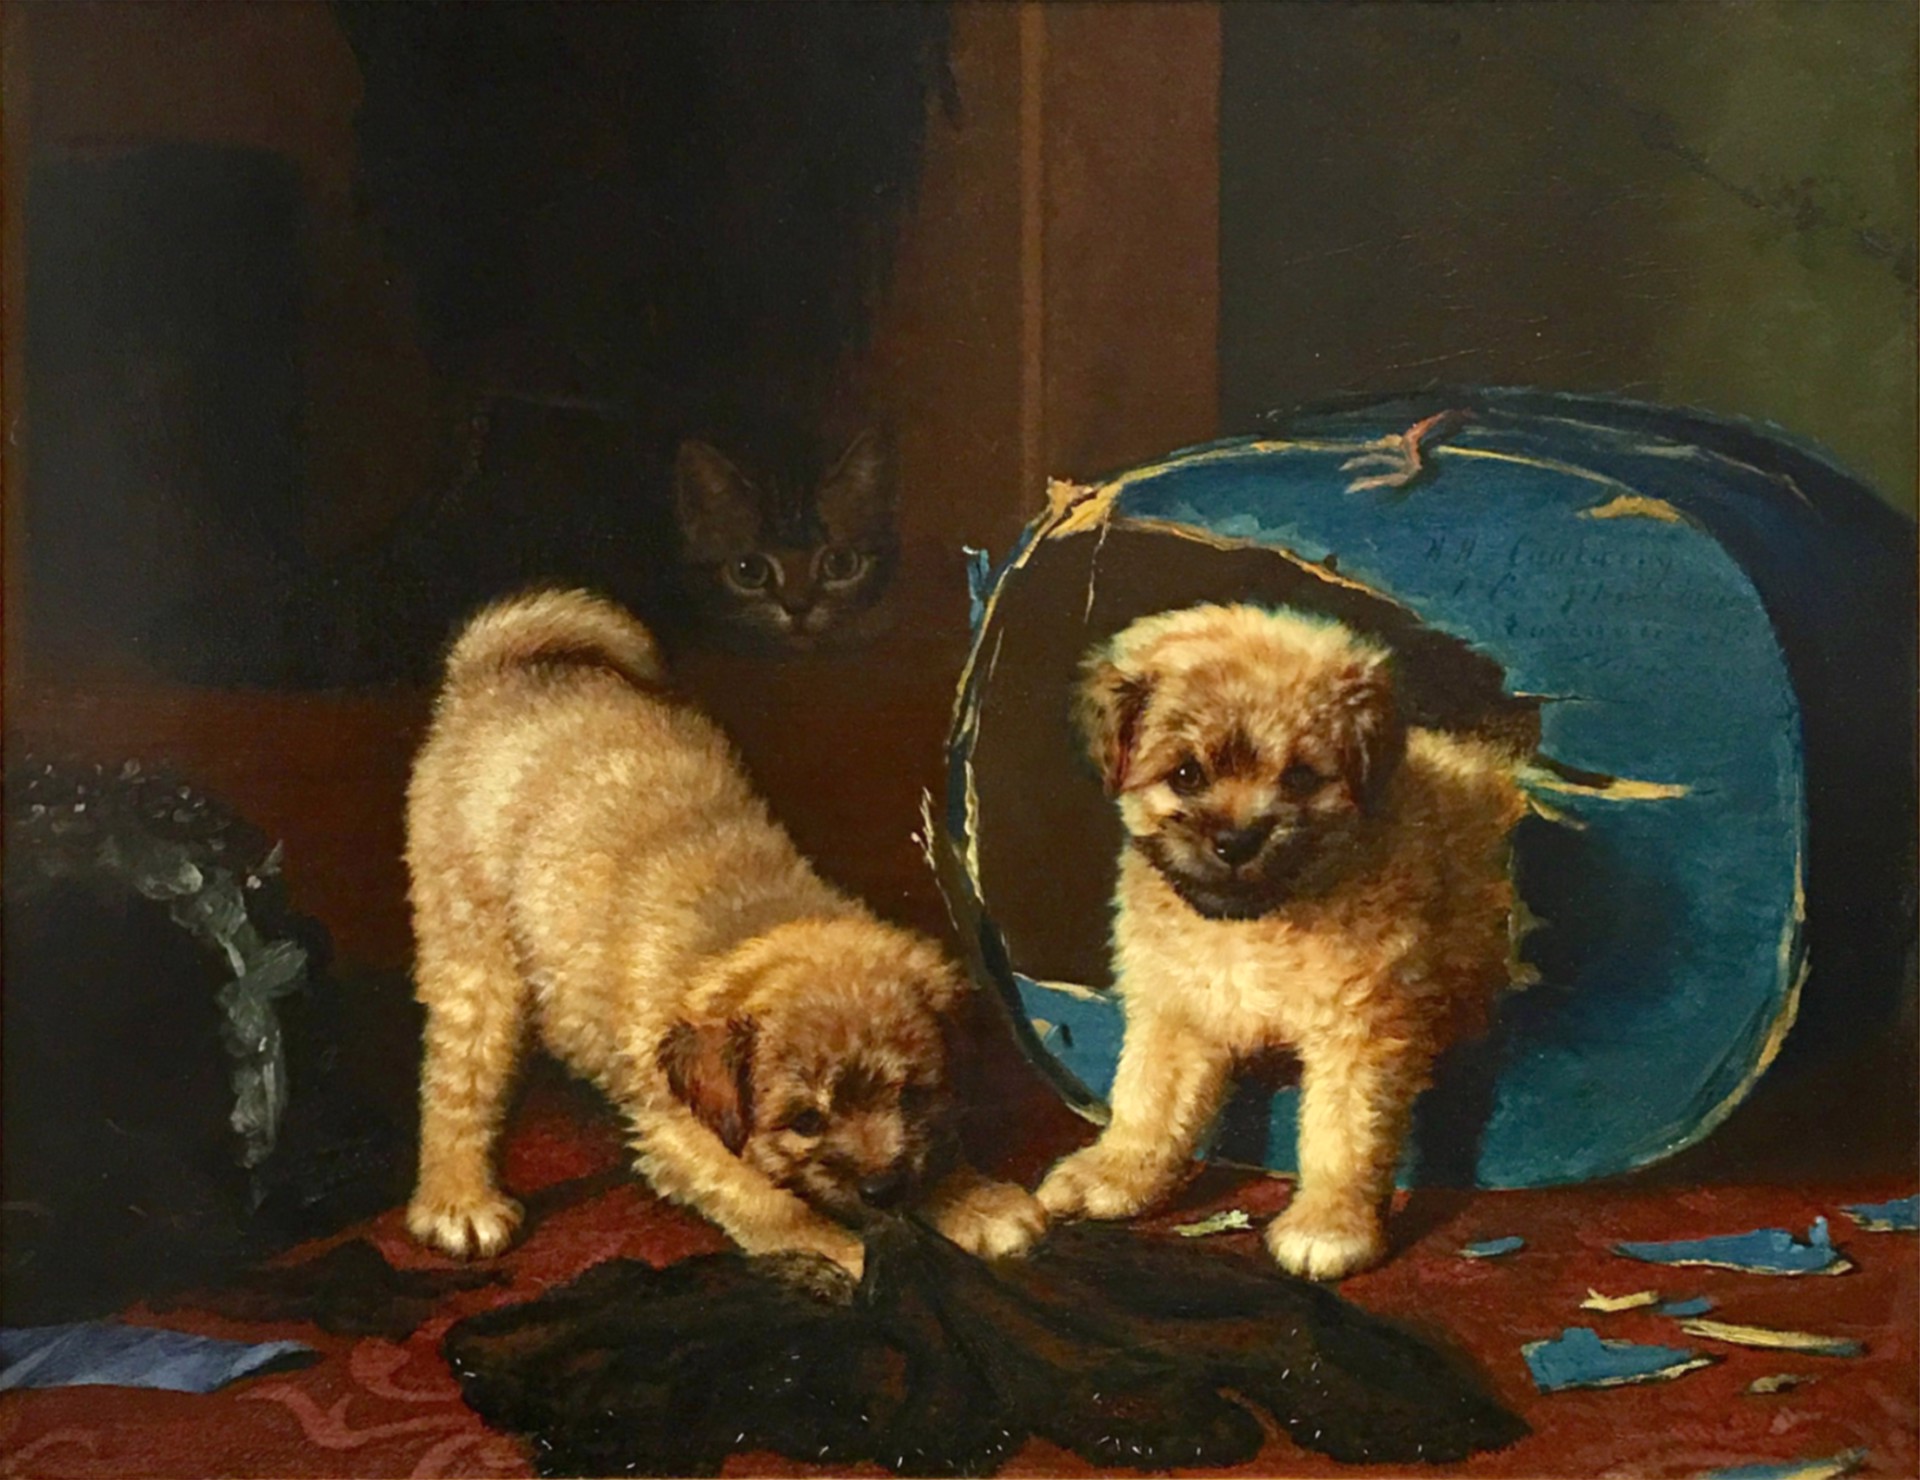 Getting into Mischief by Horatio H. Couldery